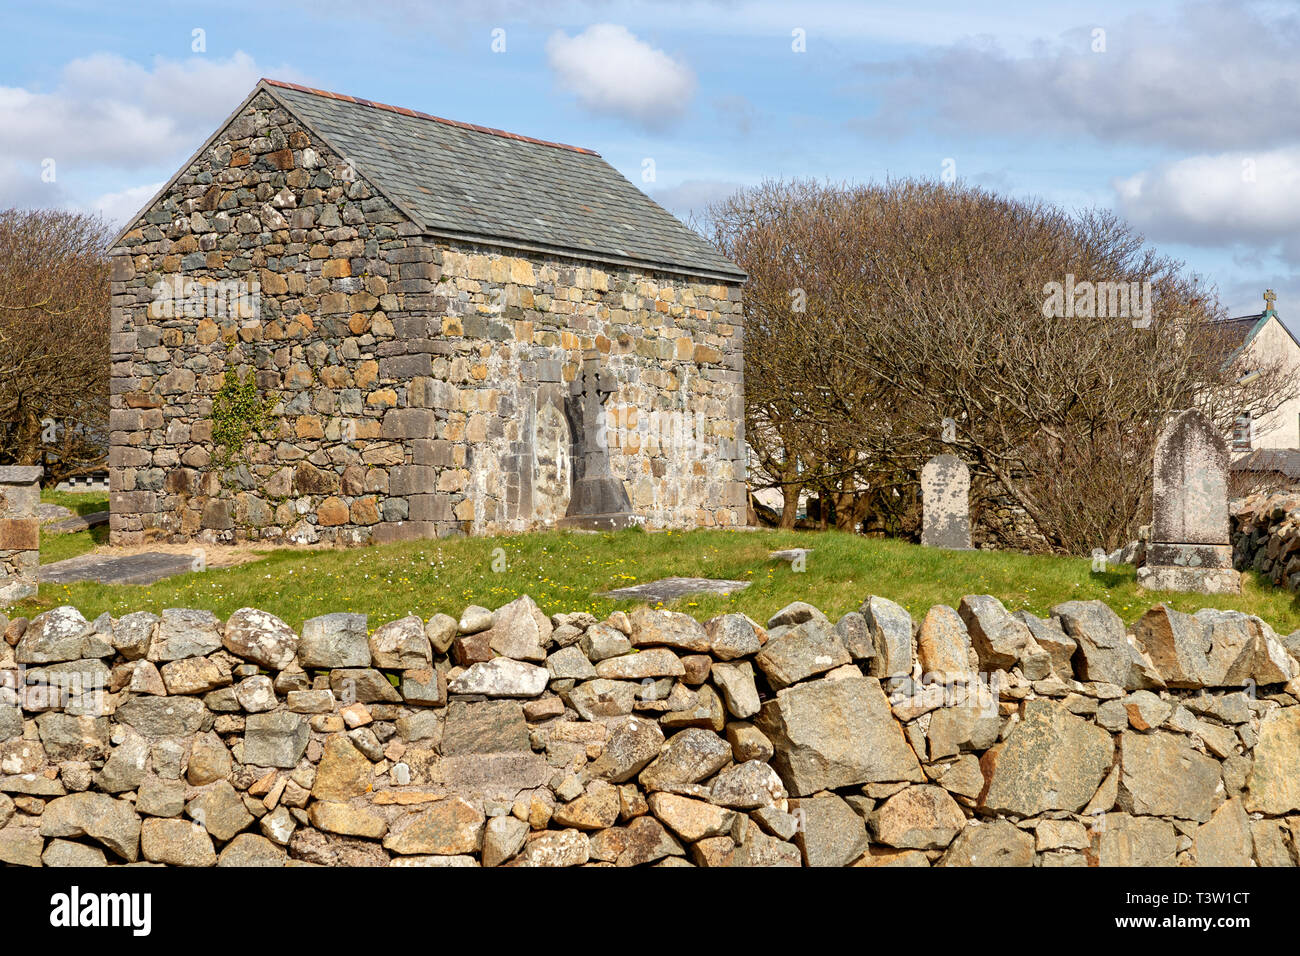 Stone house and cemetery with Celtic cross, Spiddal, Galway, Ireland Stock Photo